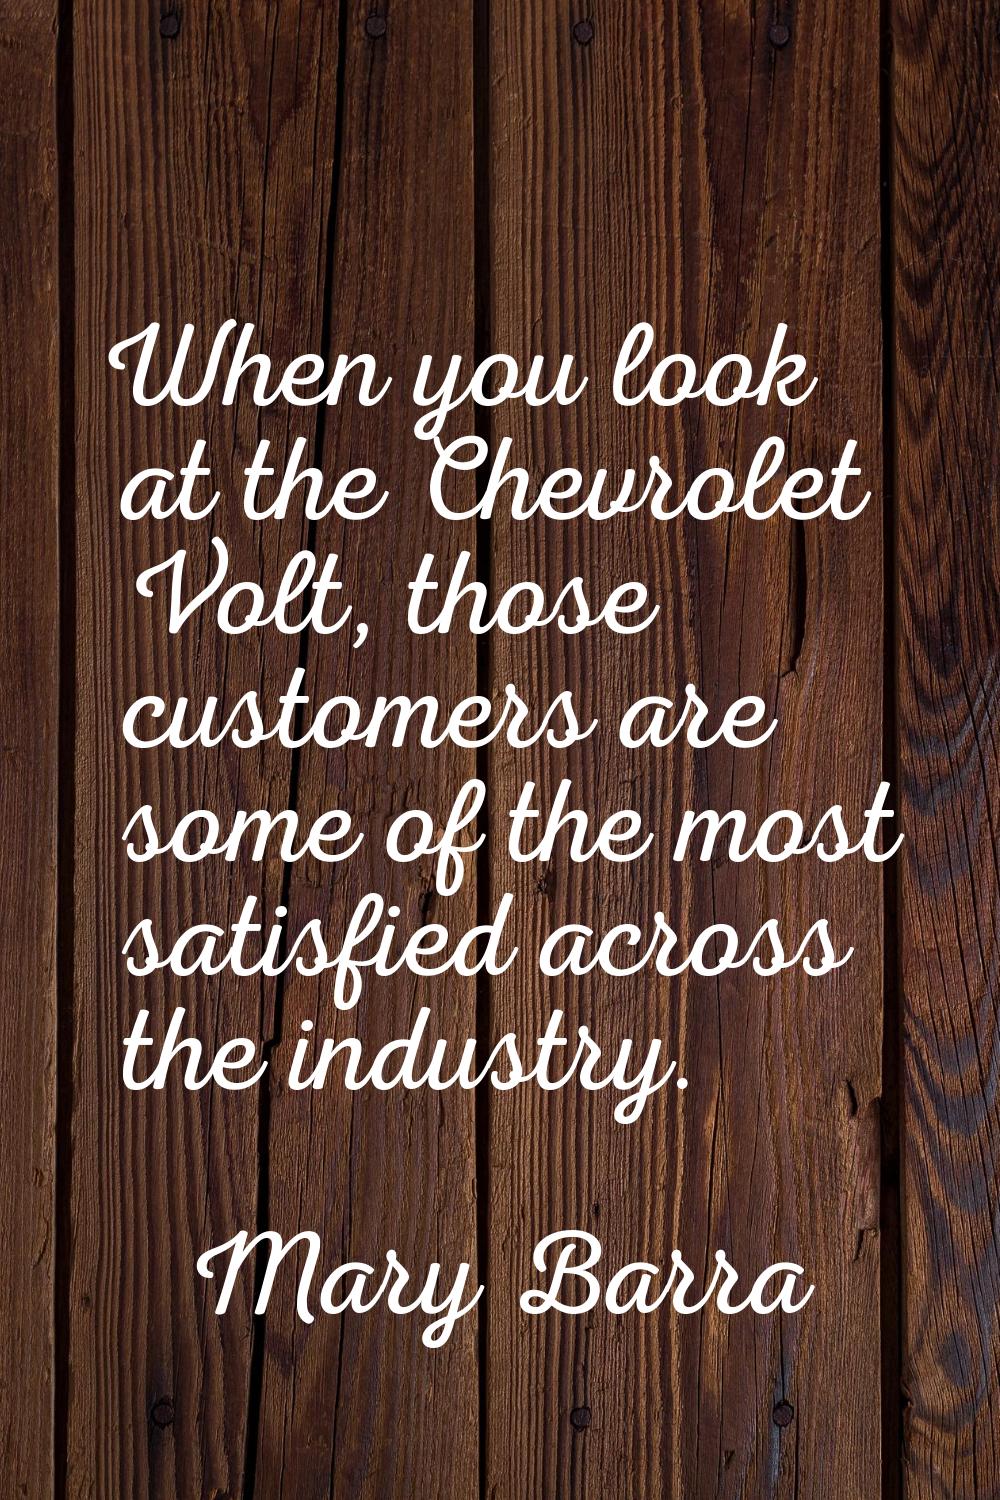 When you look at the Chevrolet Volt, those customers are some of the most satisfied across the indu